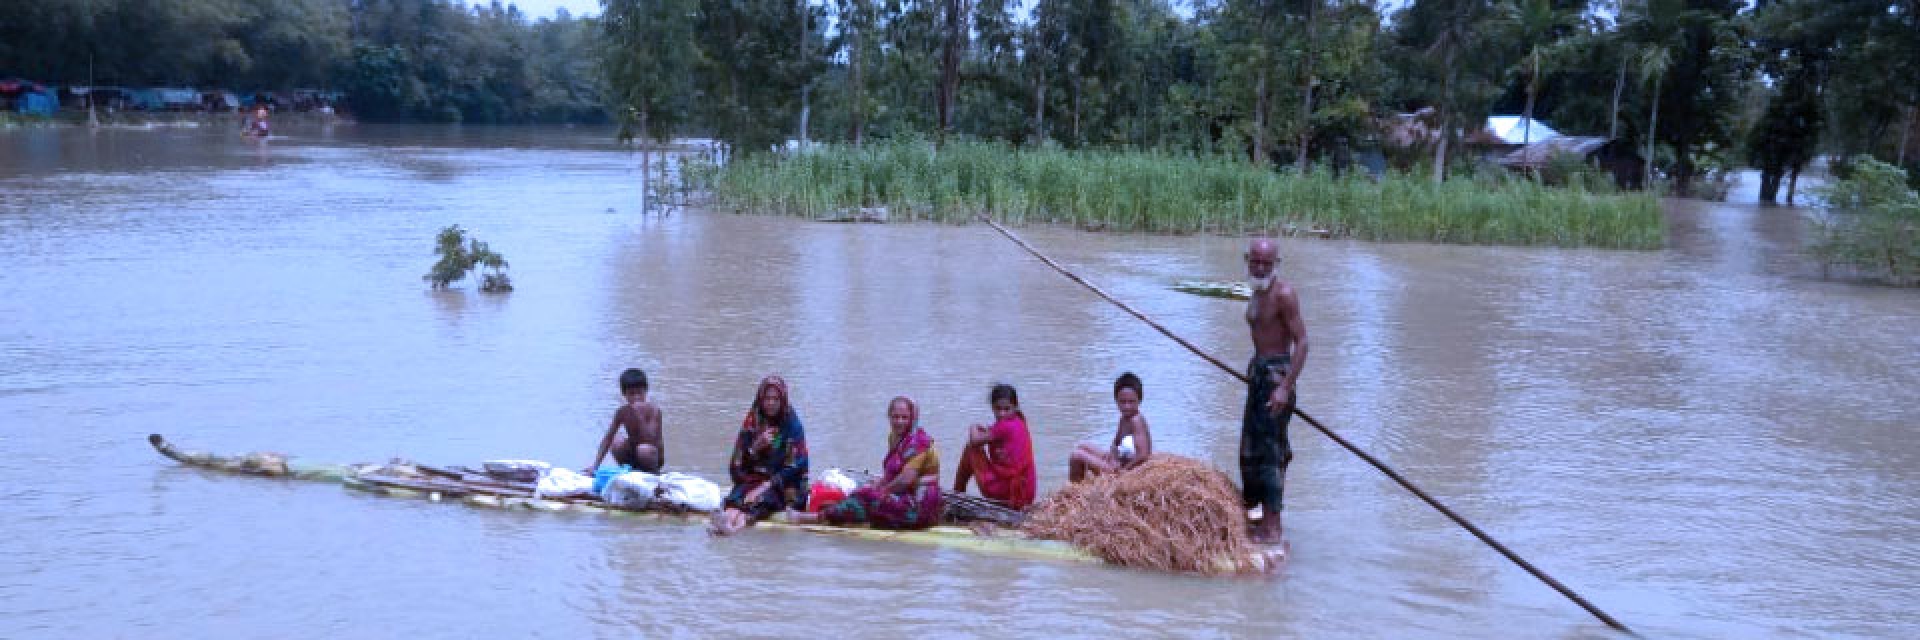 Floods in Bangladesh in 2017